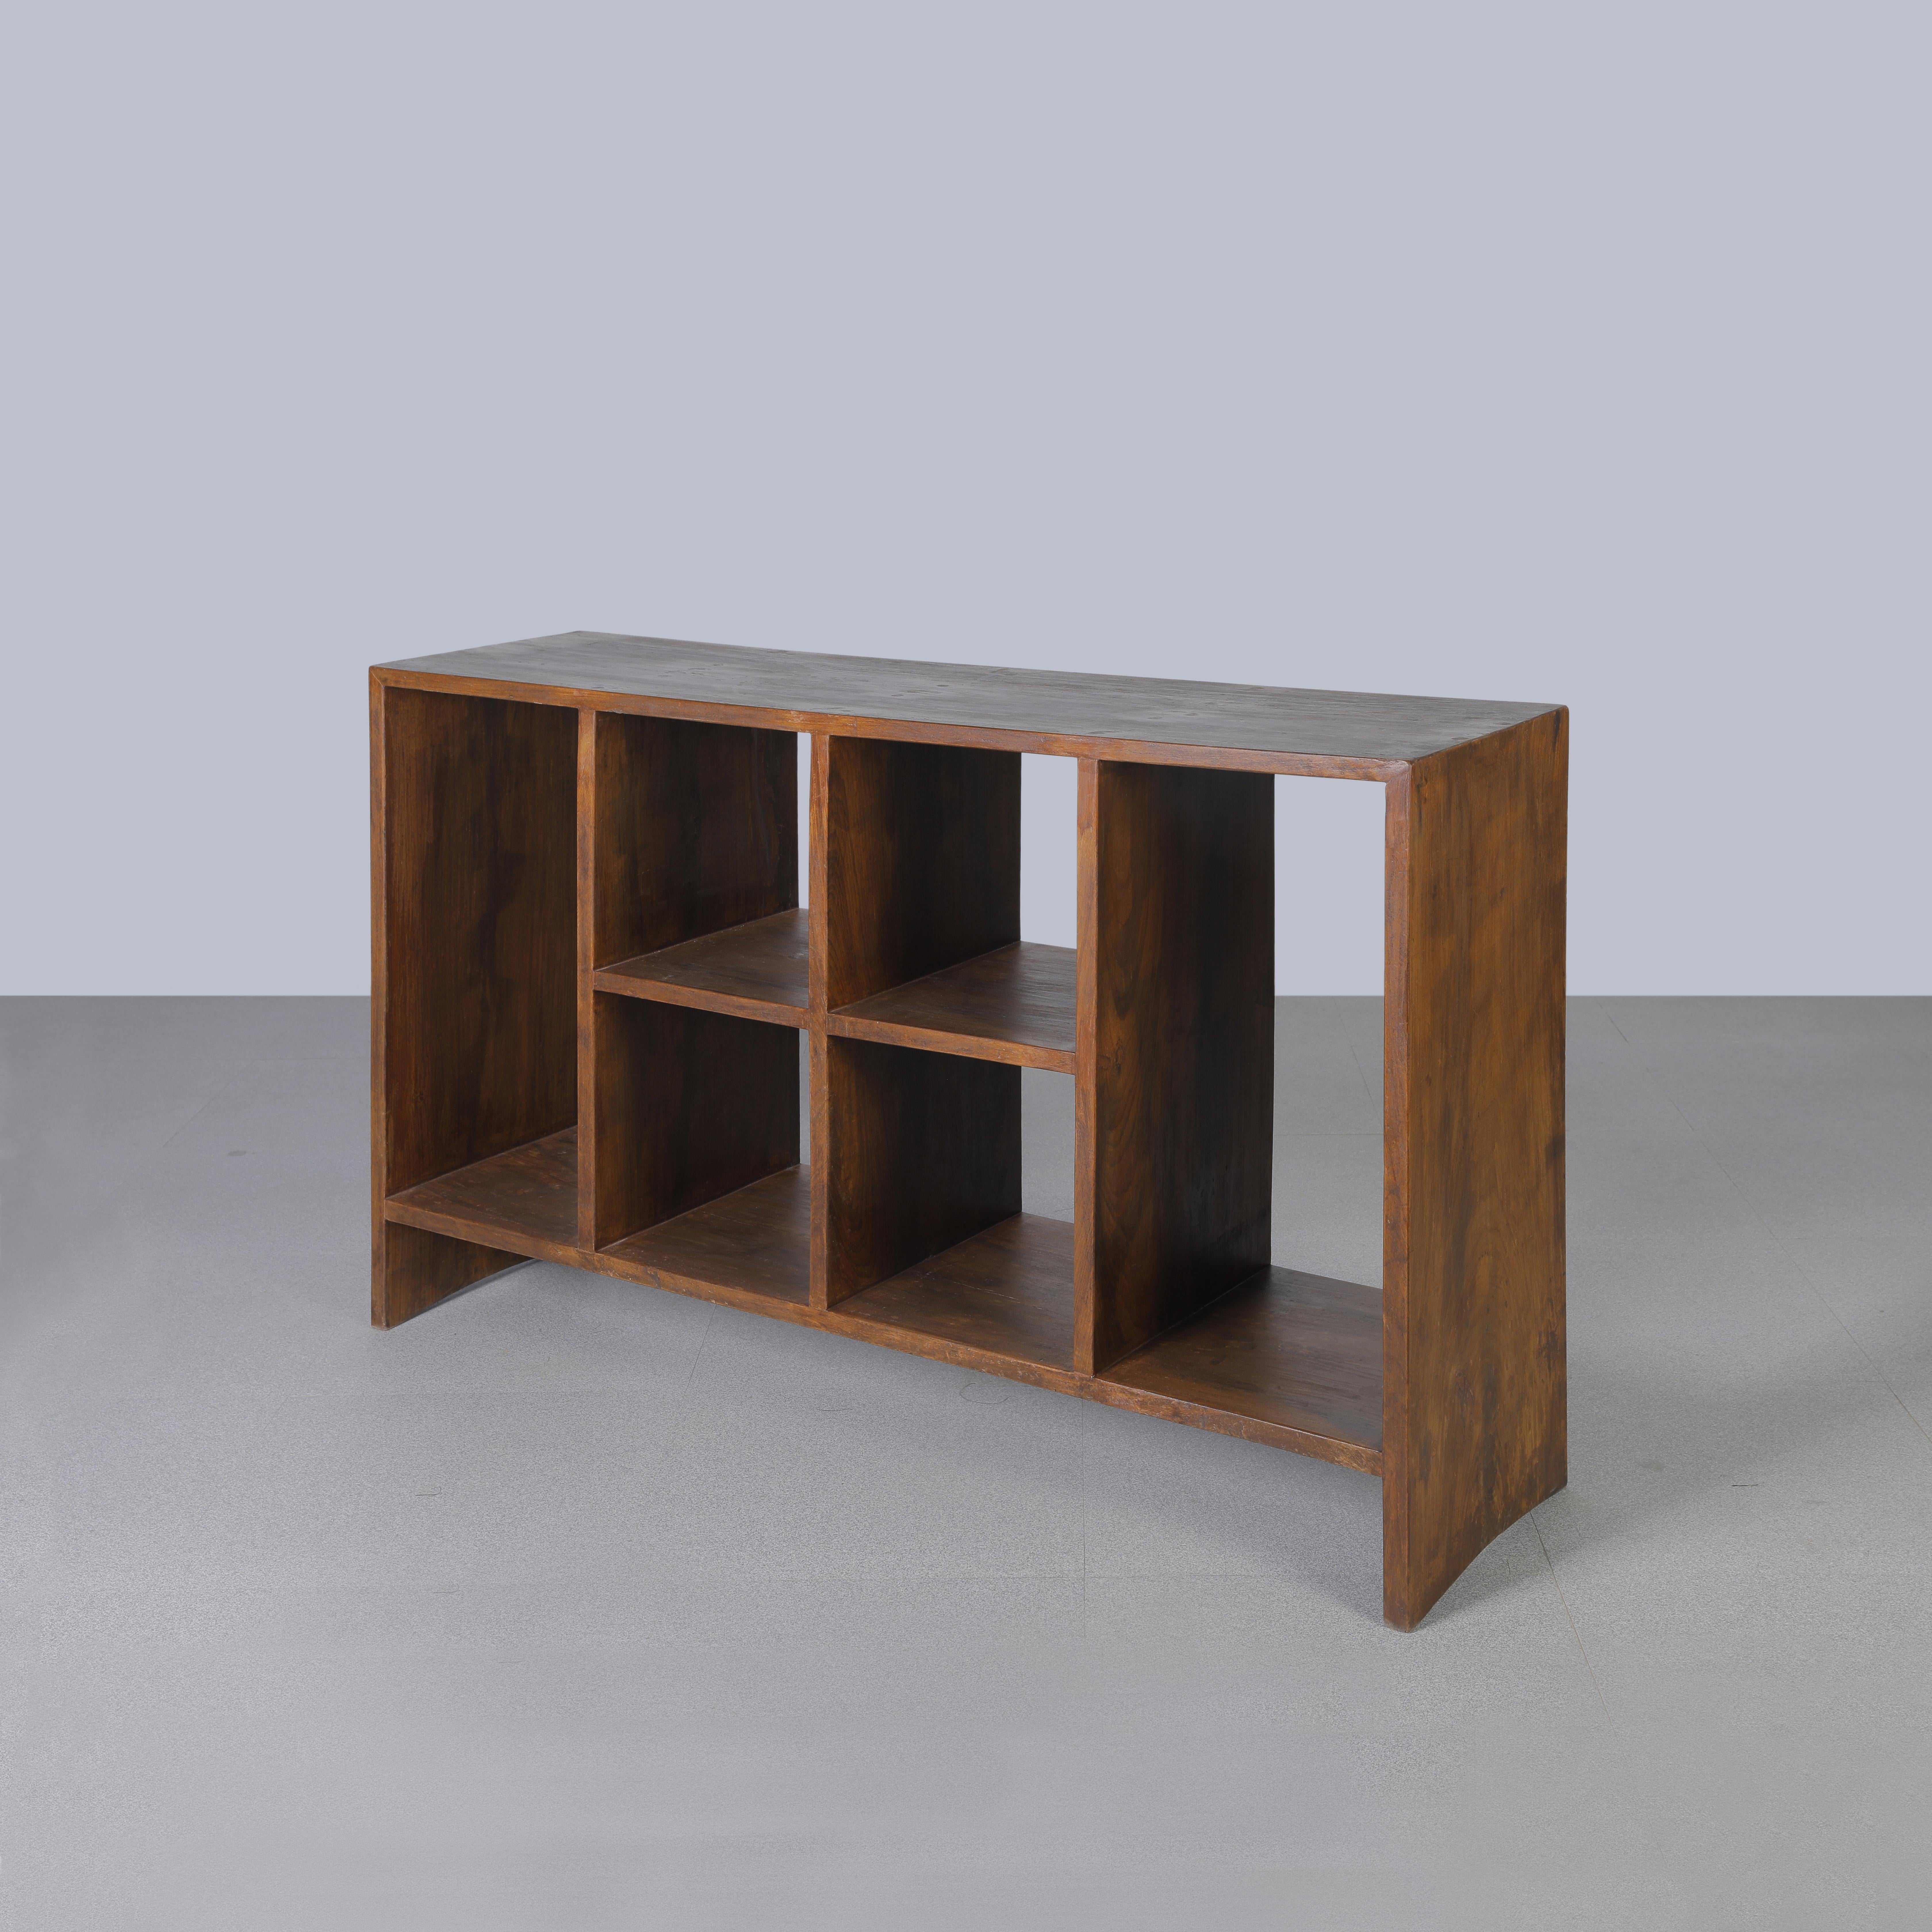 Indian Pierre Jeanneret PJ-R-27-A File Rack / Authentic Mid-Century Modern Chandigarh For Sale